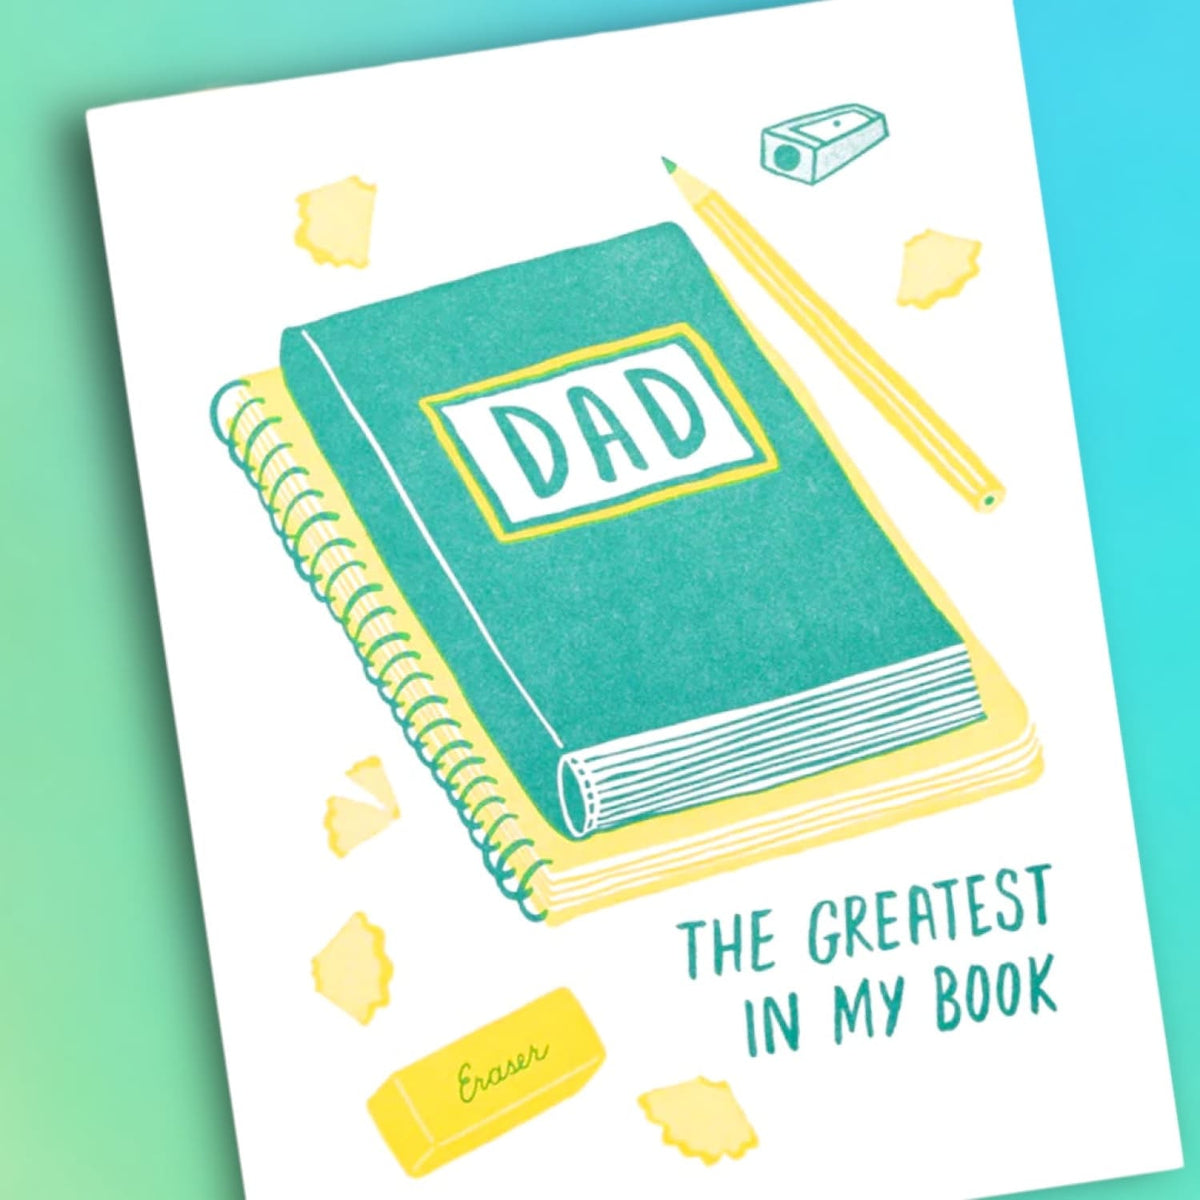 Dad Book Father’s Day Card - Gift Retro Style Sneak Peek